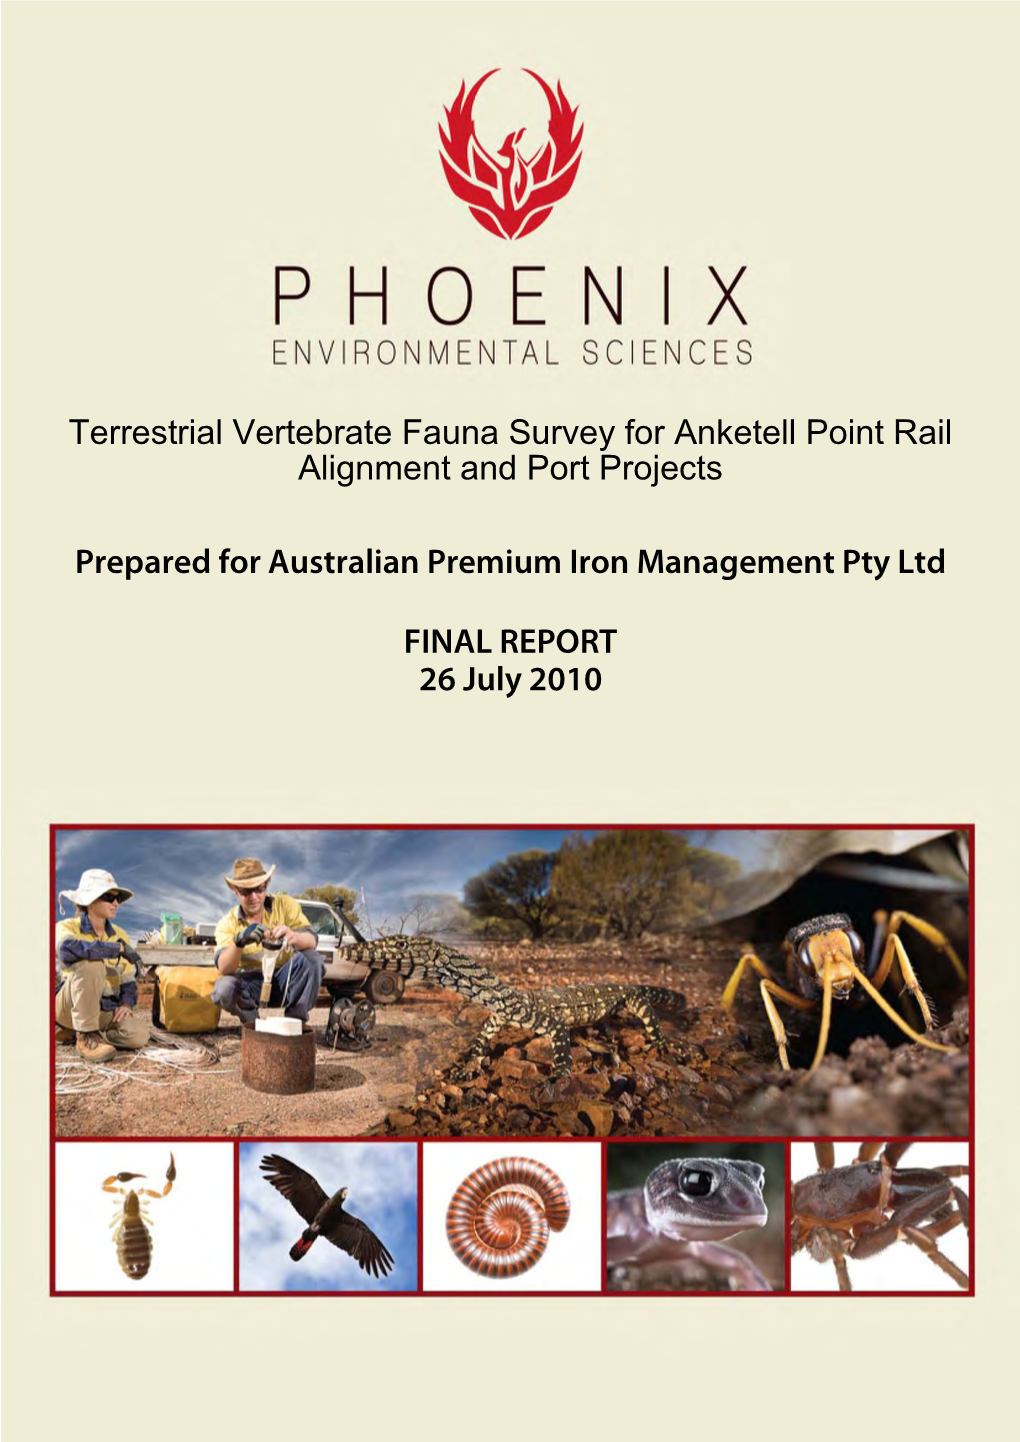 Terrestrial Vertebrate Fauna Survey for Anketell Point Rail Alignment and Port Projects